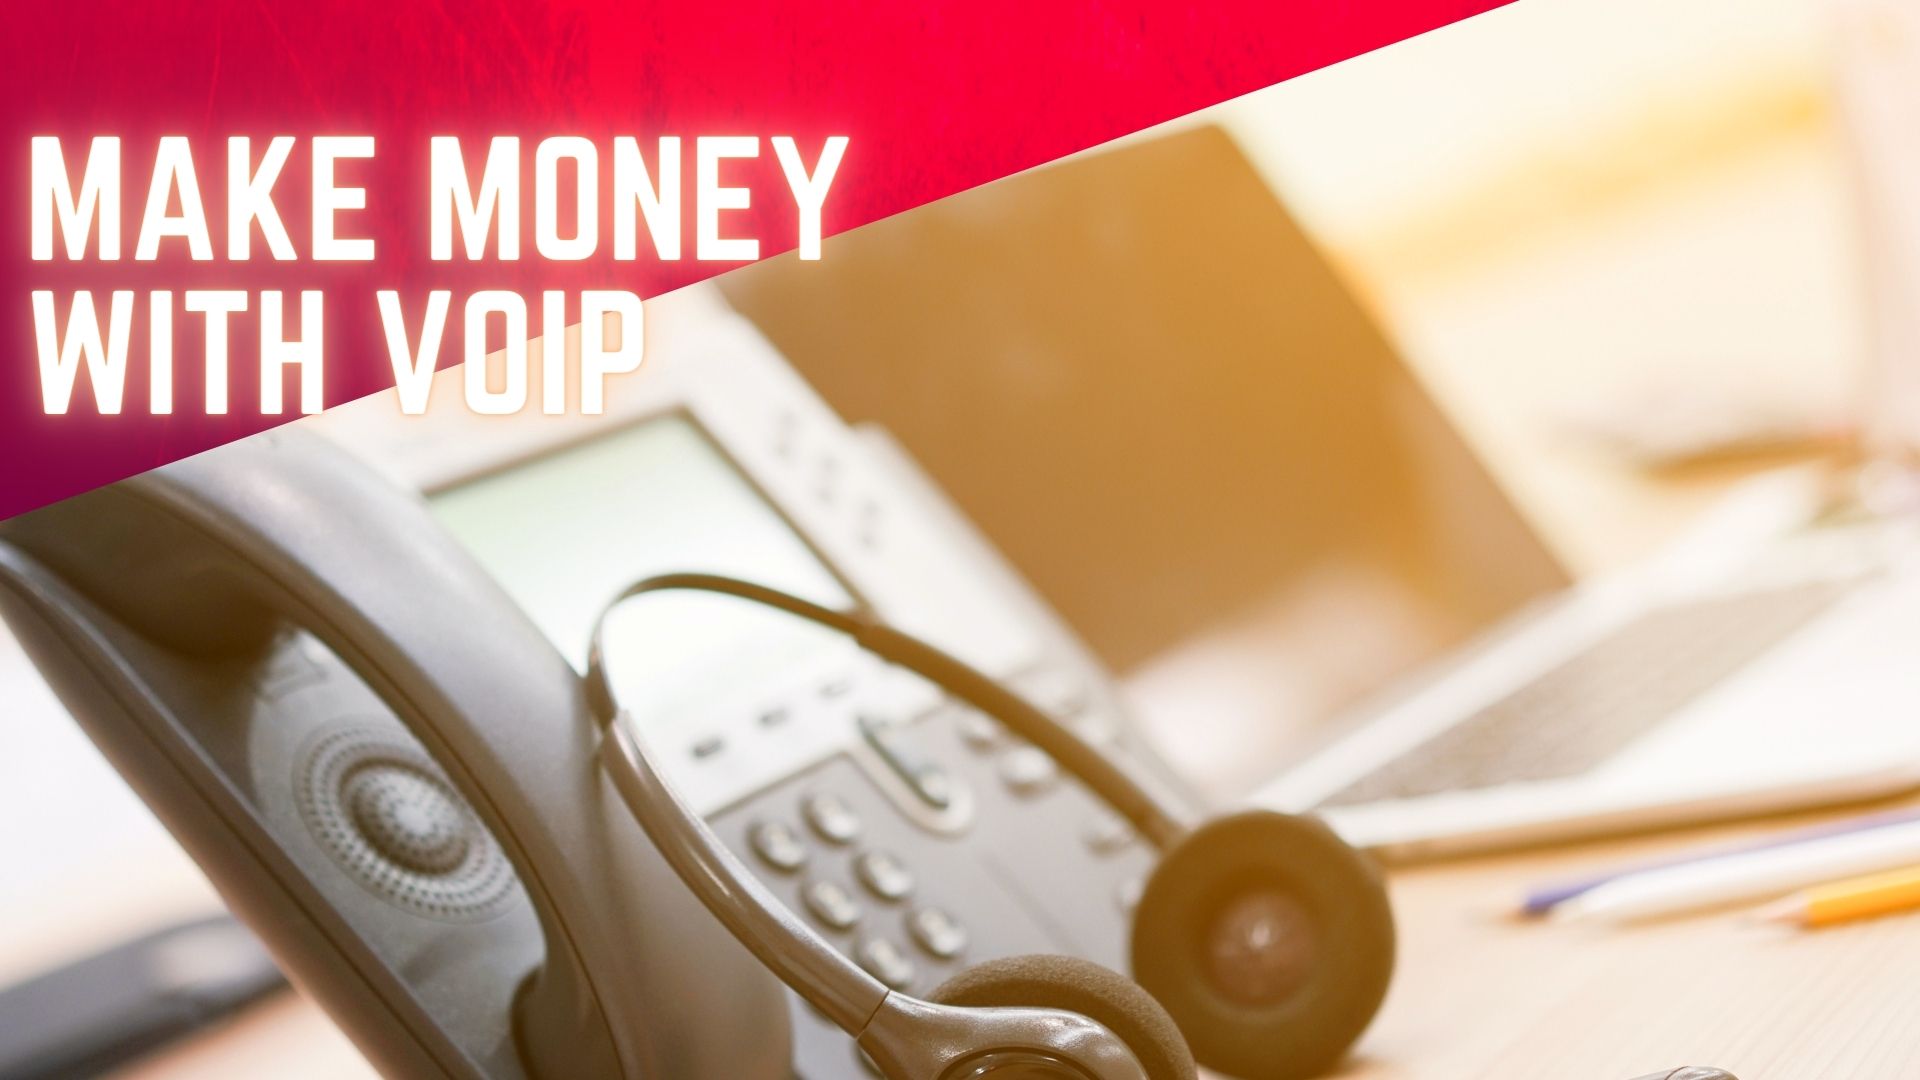 Make Money With VoIP